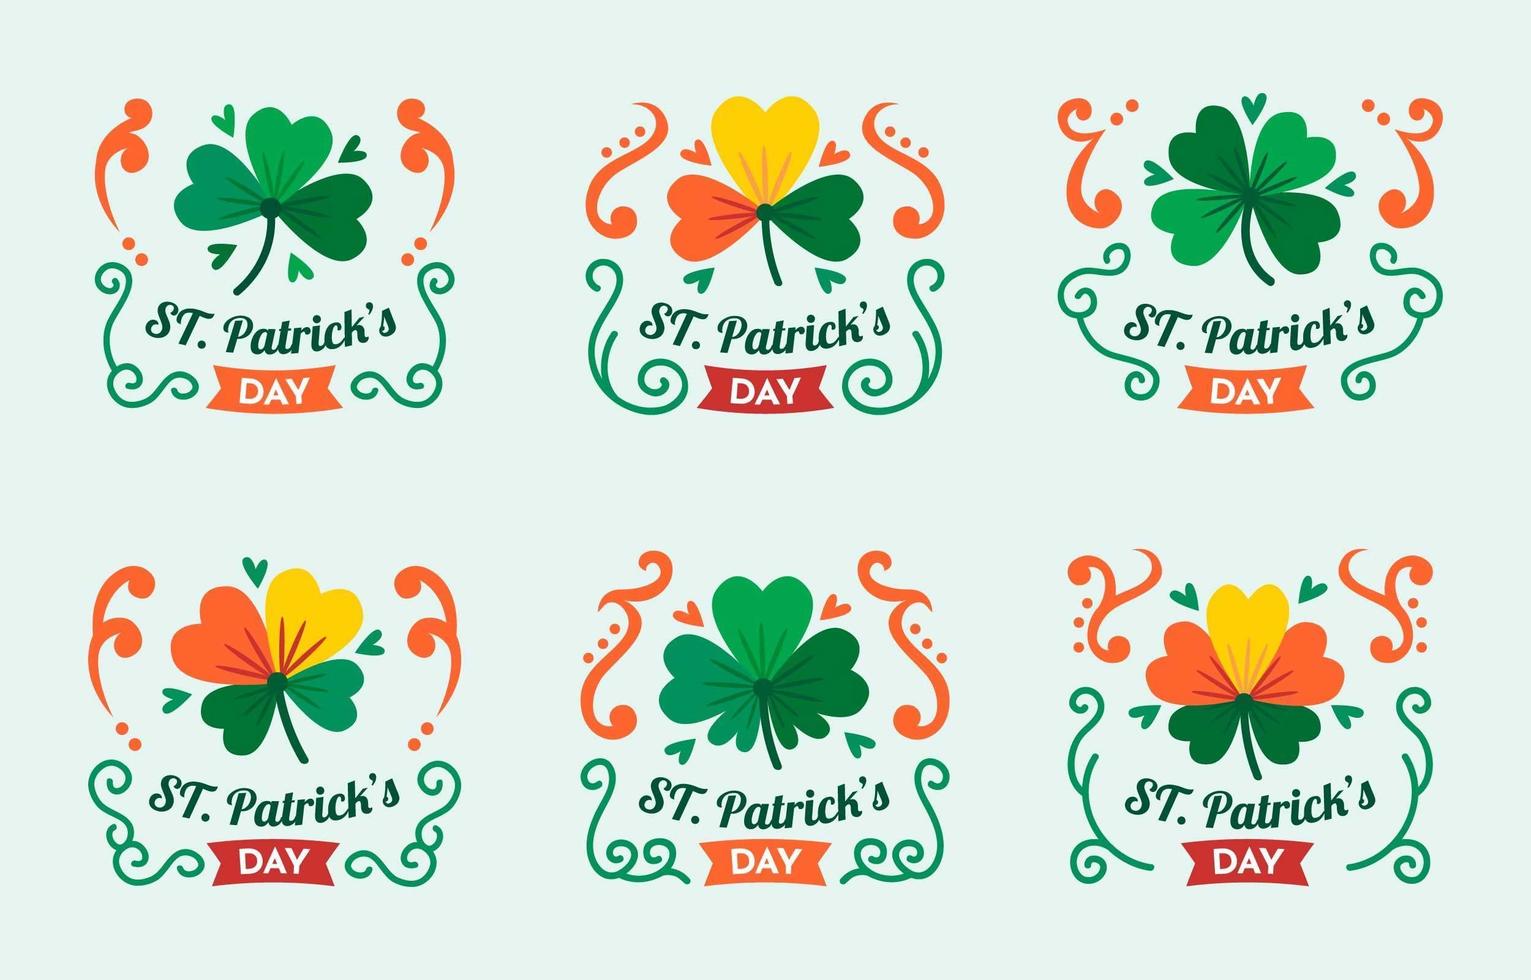 st. patrick's day badge-collecties vector